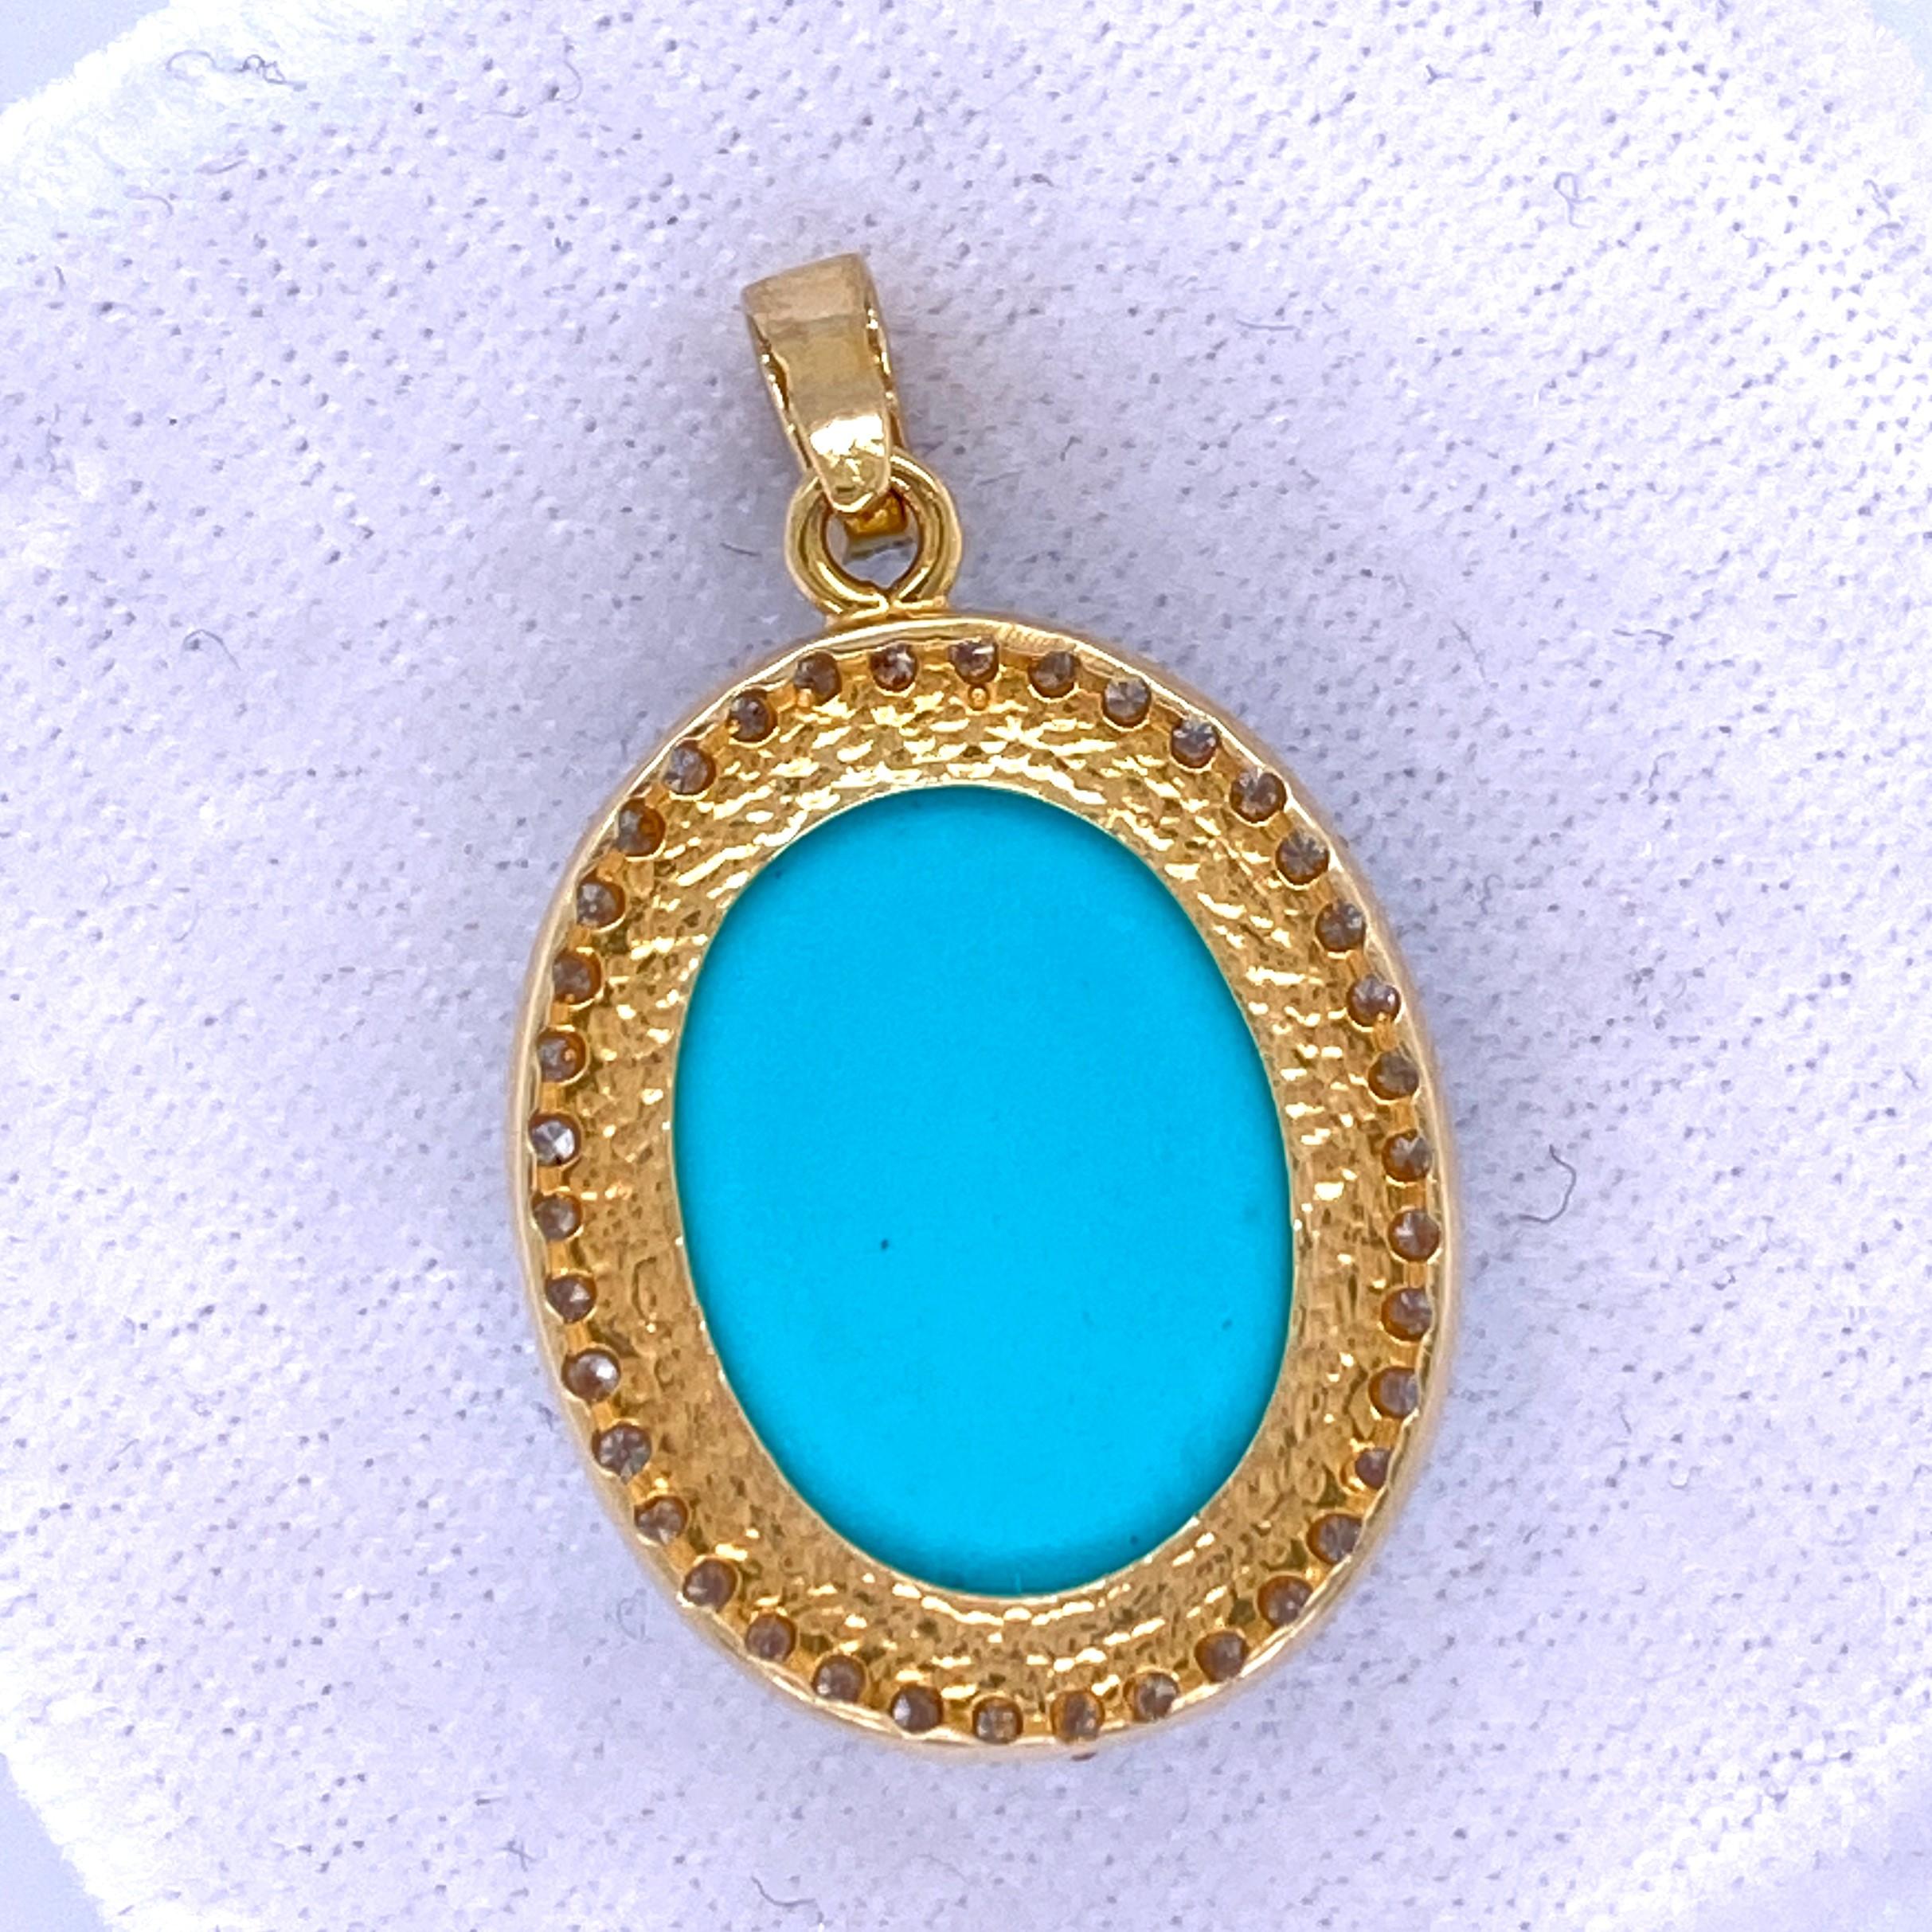 One 14 karat yellow gold (acid tested) pendant, set with one 15.5 x 11.5mm oval turquoise stone surrounded by thirty-seven round brilliant diamonds, approximately 0.33 carat total weight with G/H color and SI clarity.  The bail is set with four